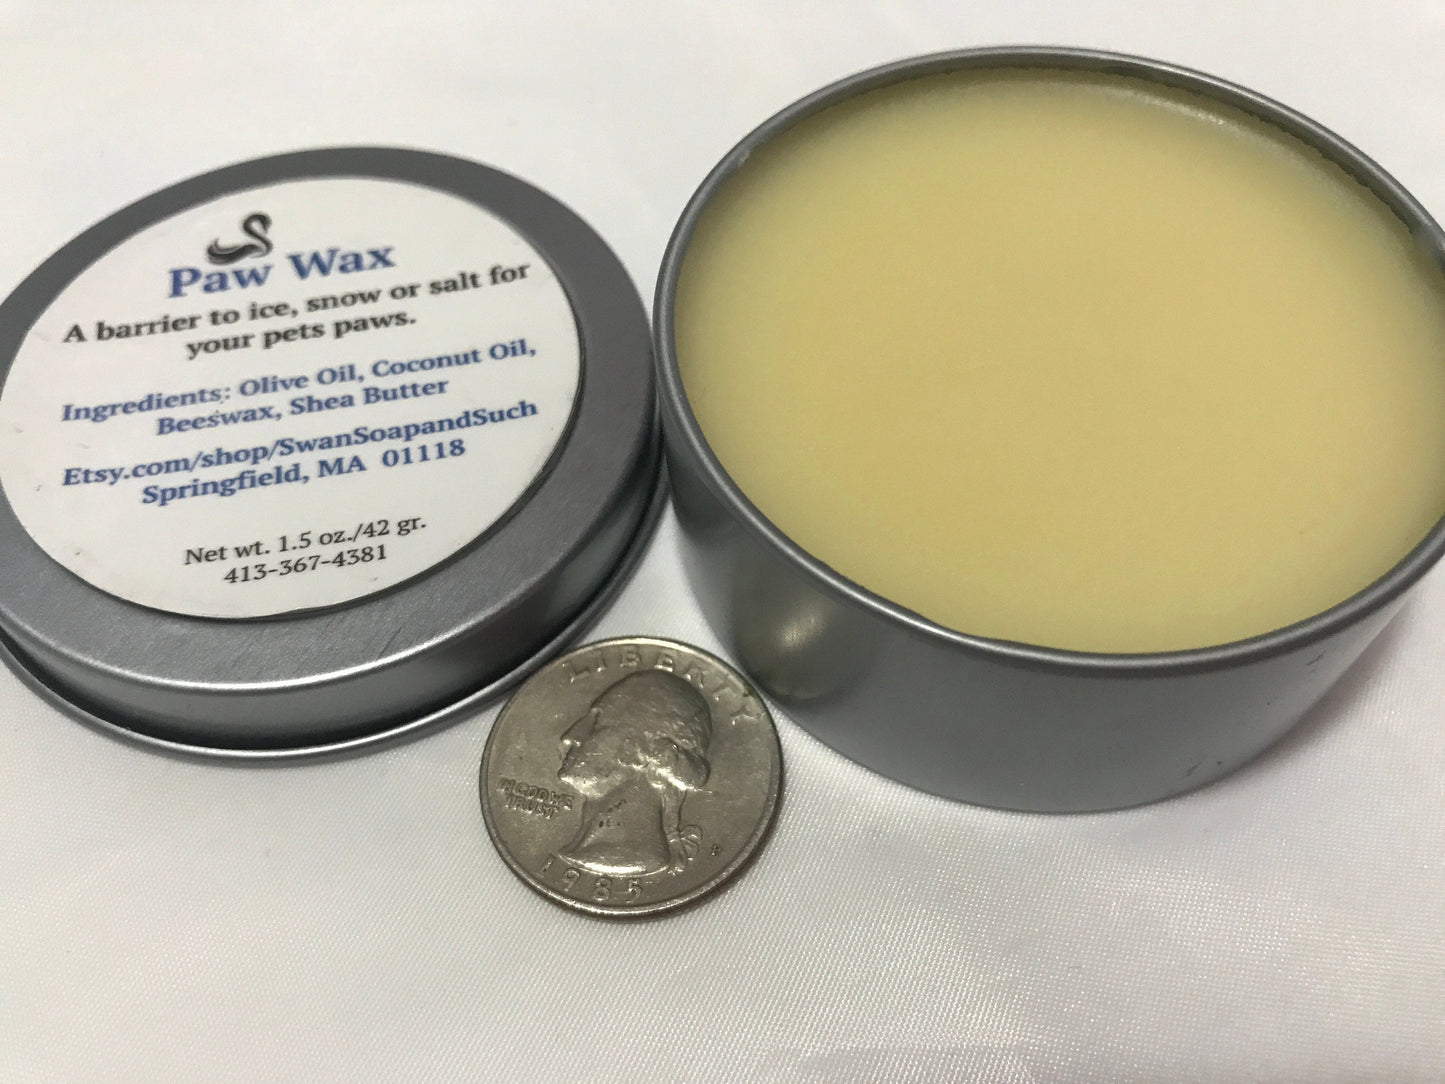 A photo showing a container of Paw Wax Paw Balm